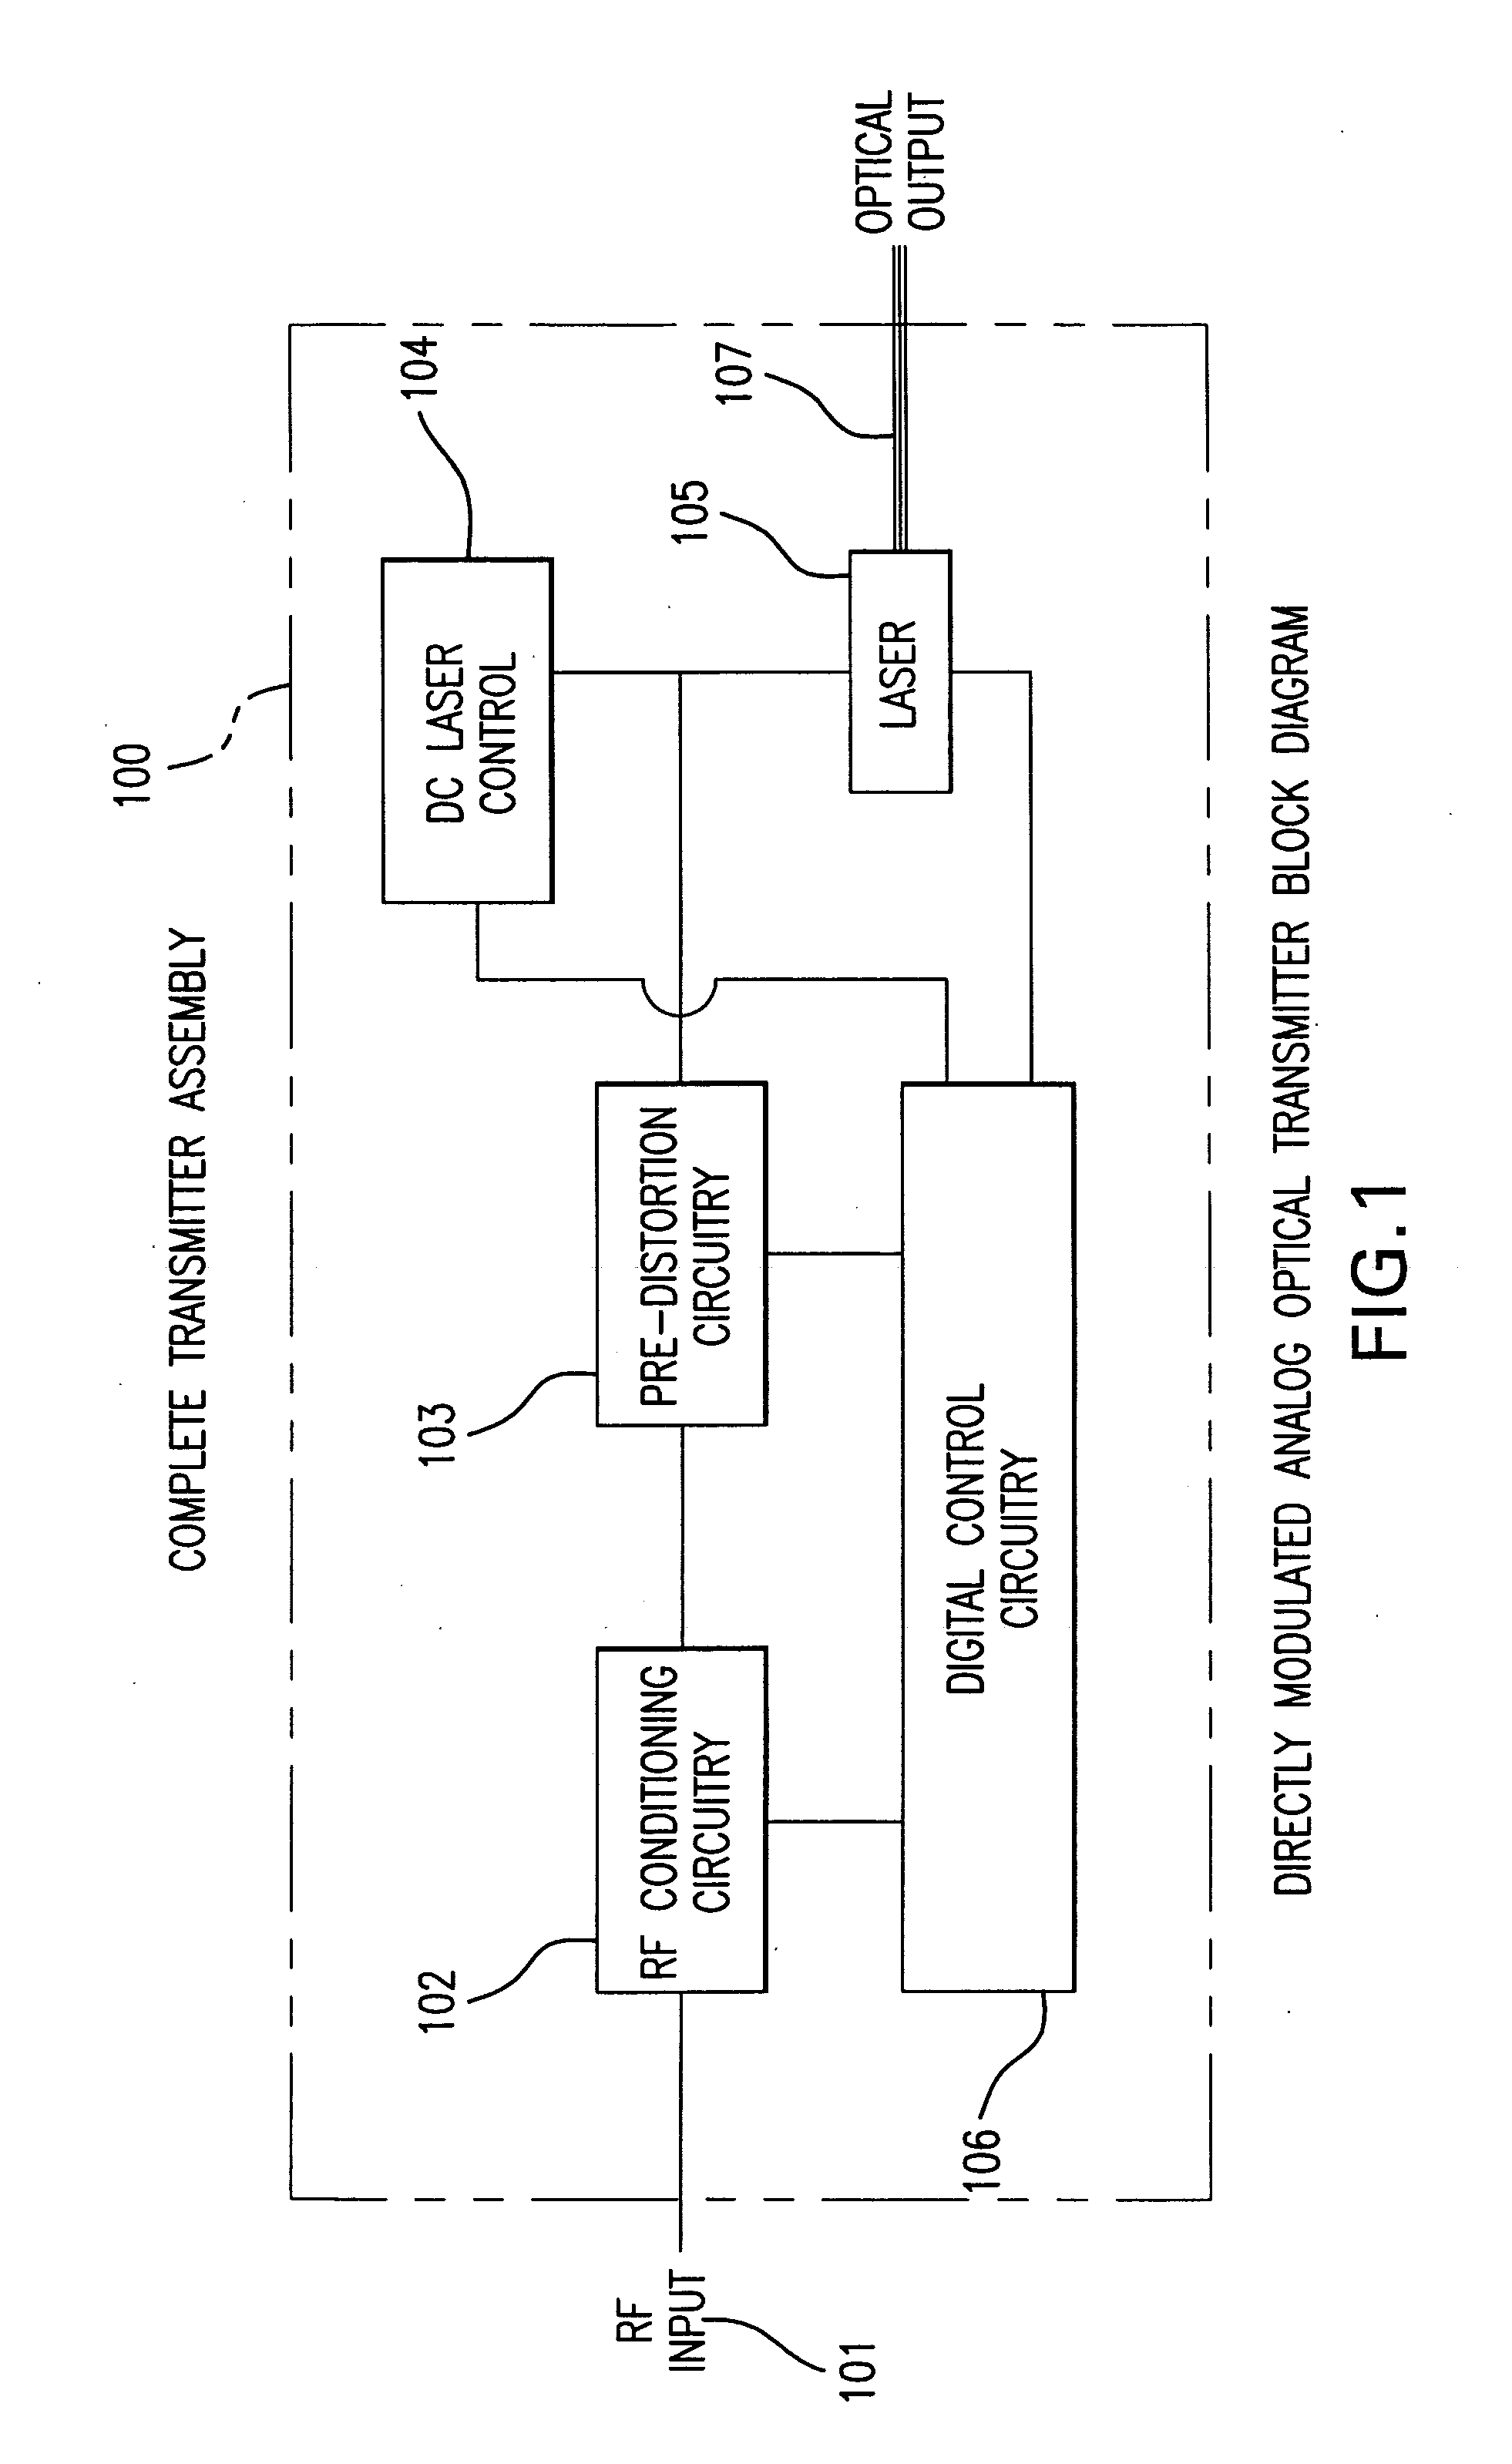 Directly modulated laser optical transmission system